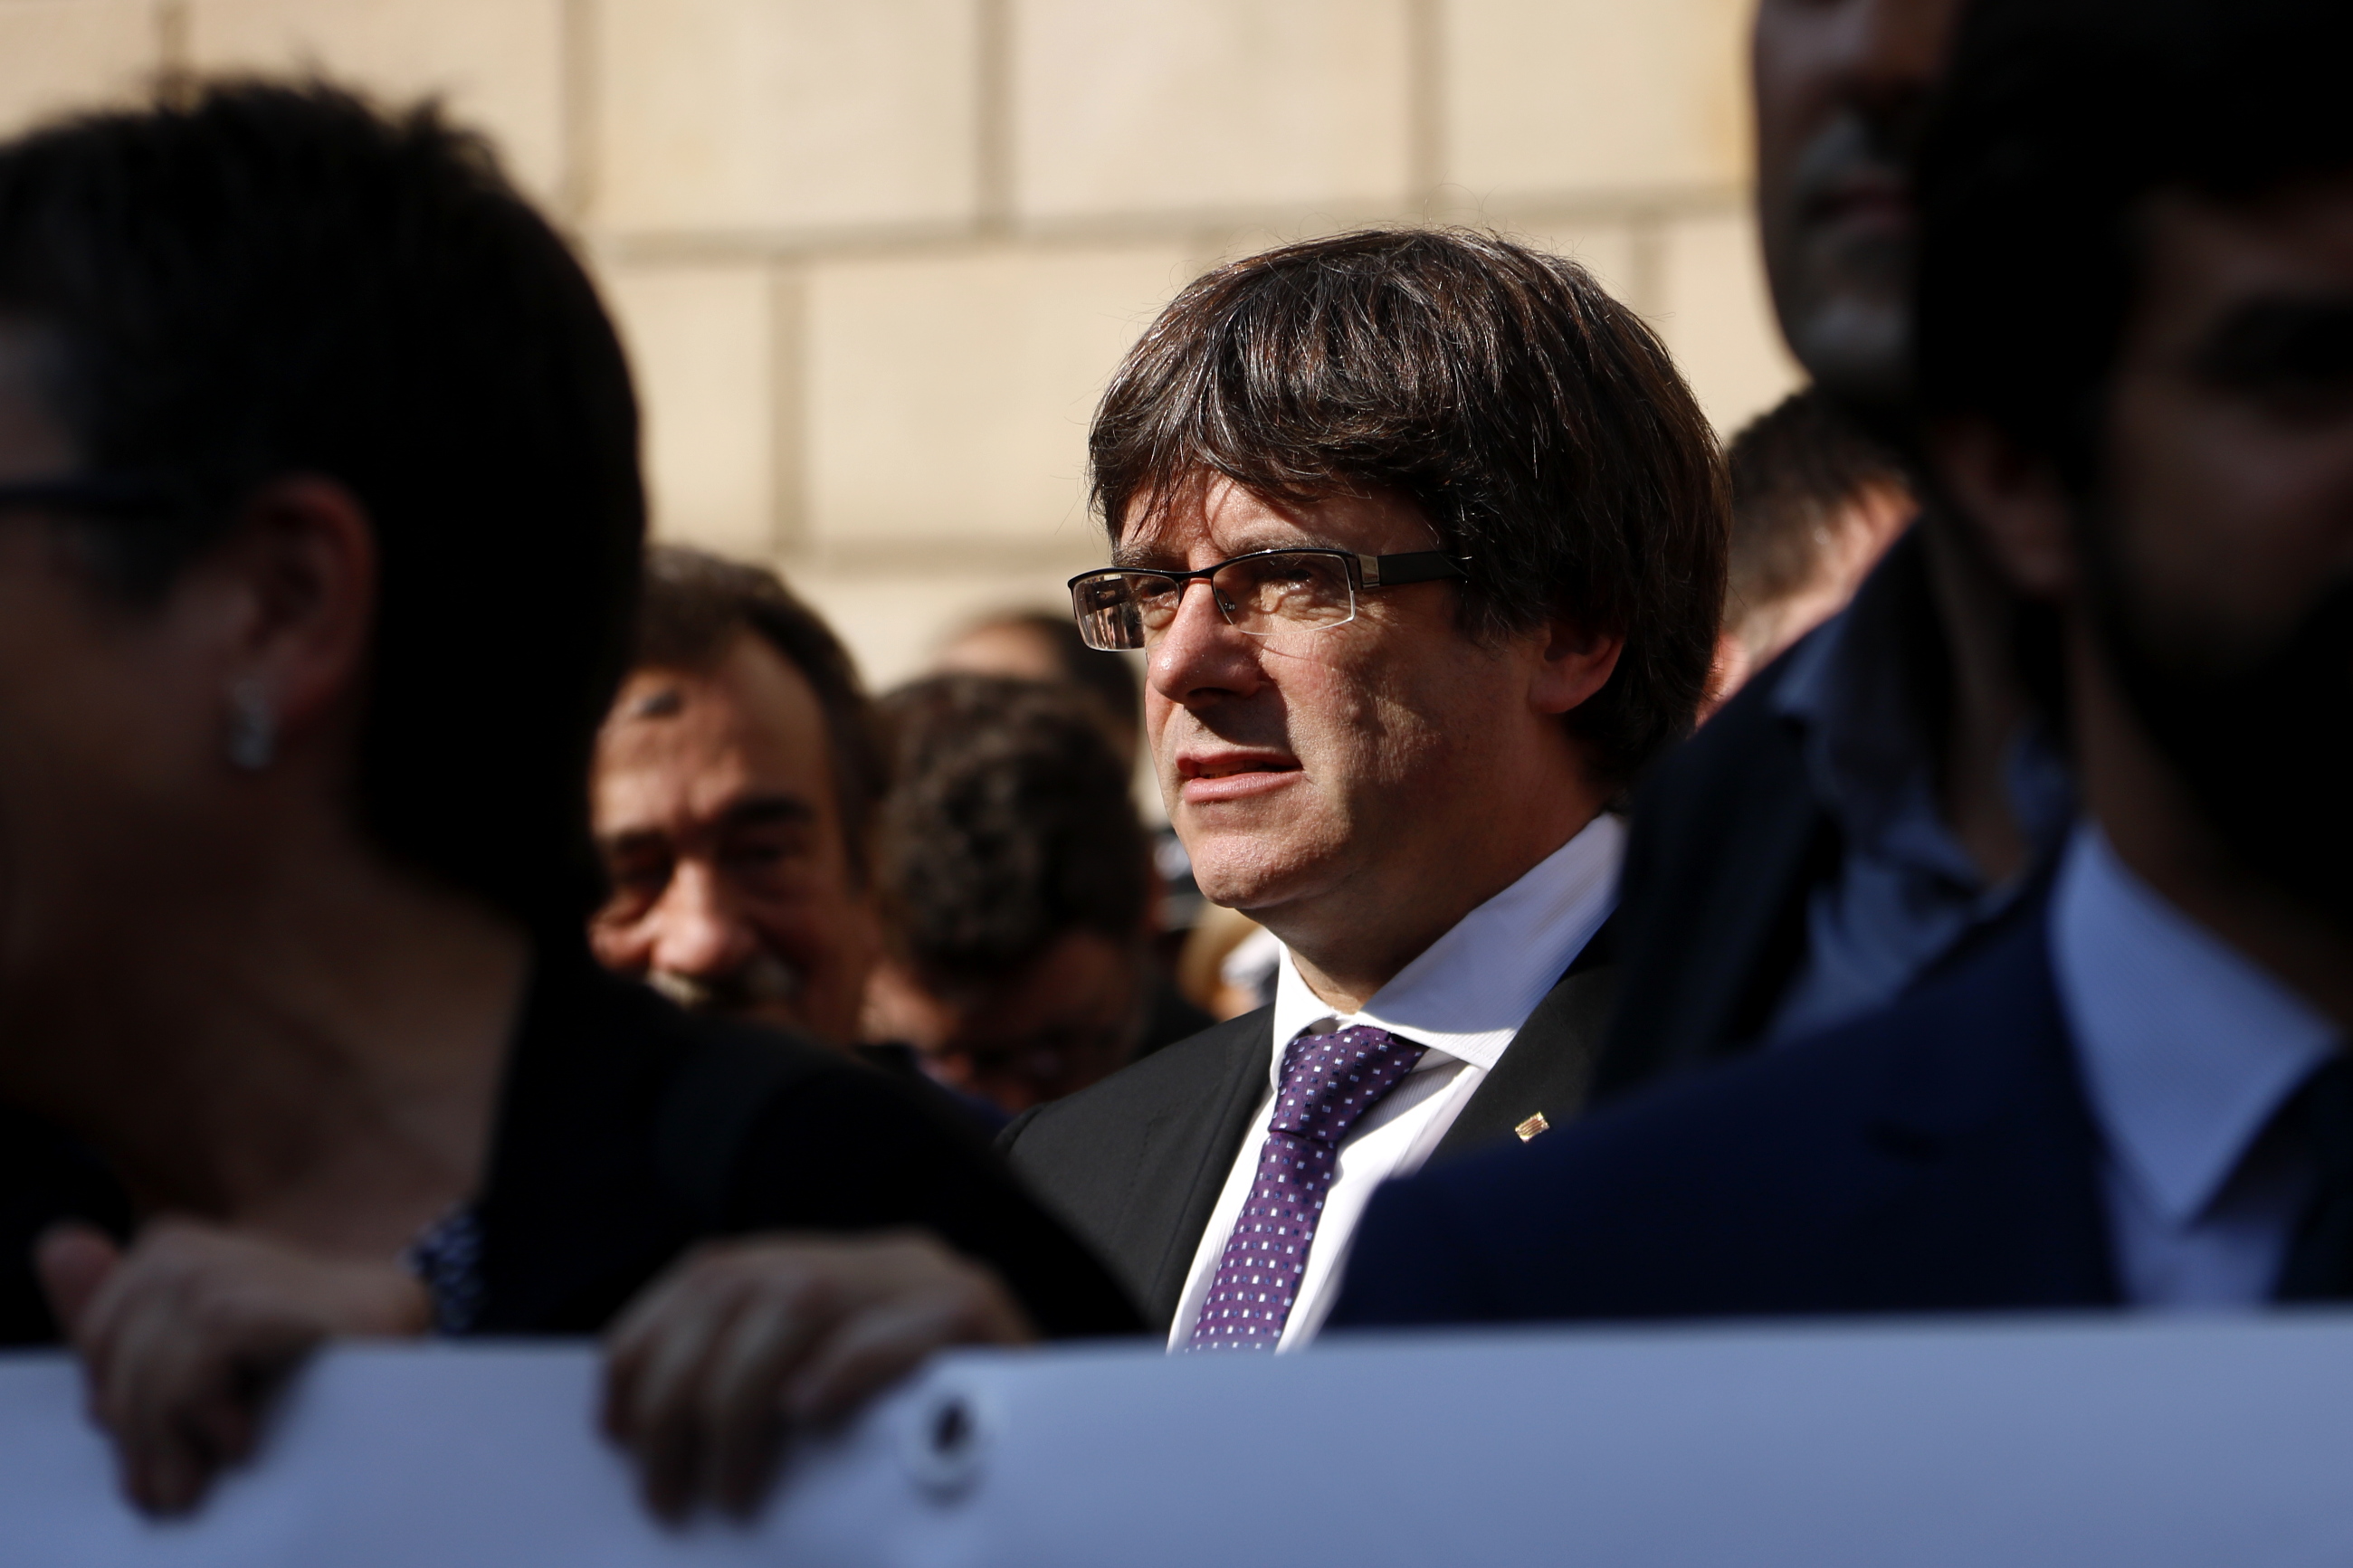 Dismissed Catalan president Carles Puigdemont at the protest demanding the release of Jordi Sánchez and Jordi Cuixart on October 17 (by ACN)